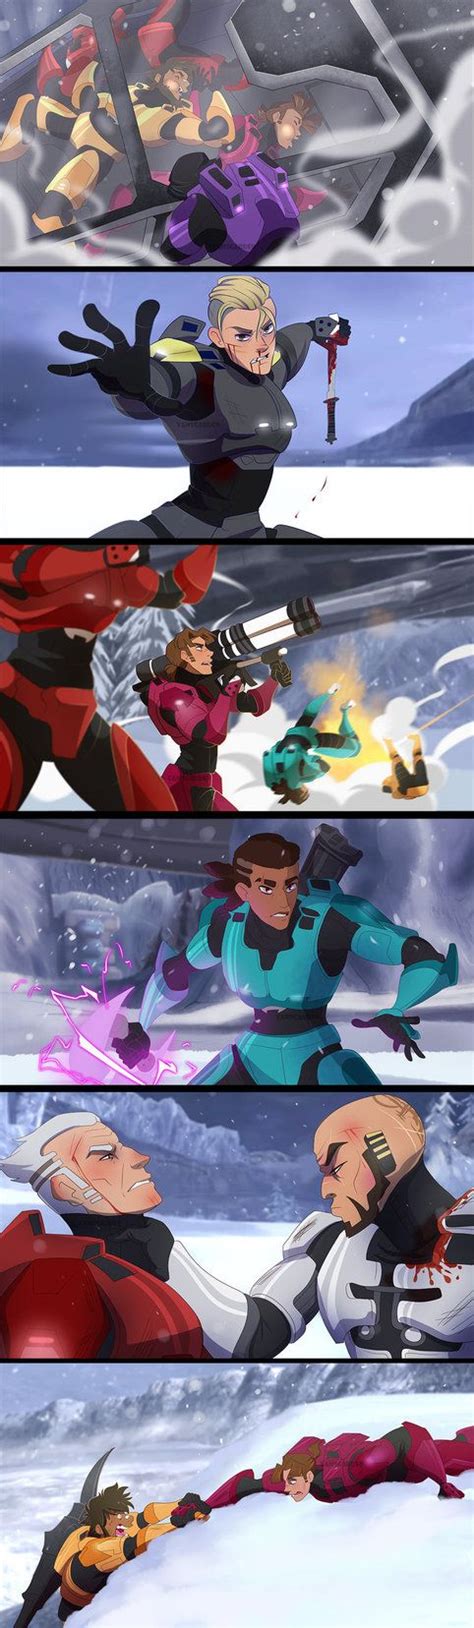 Red Vs Blue Screenshots Redraws 2 By Yamsgarden On Deviantart Red Vs Blue Characters Red Vs